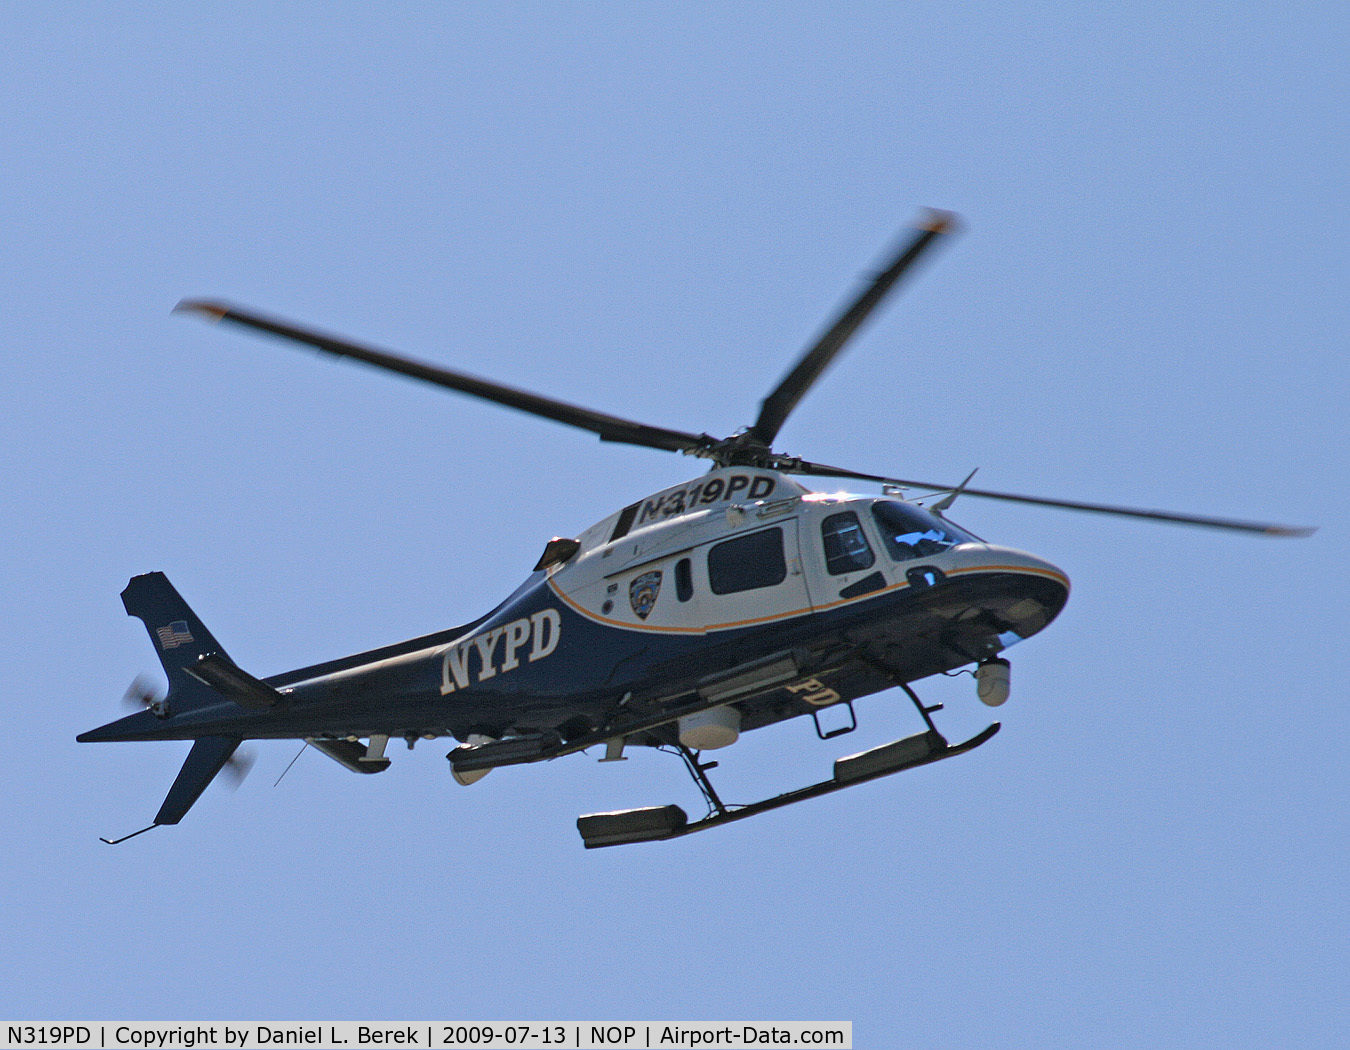 N319PD, 2004 Agusta A-119 Koala C/N 14040, One of New York's finest approaches the NYPD heliport base at Floyd Bennet Field (NOP).